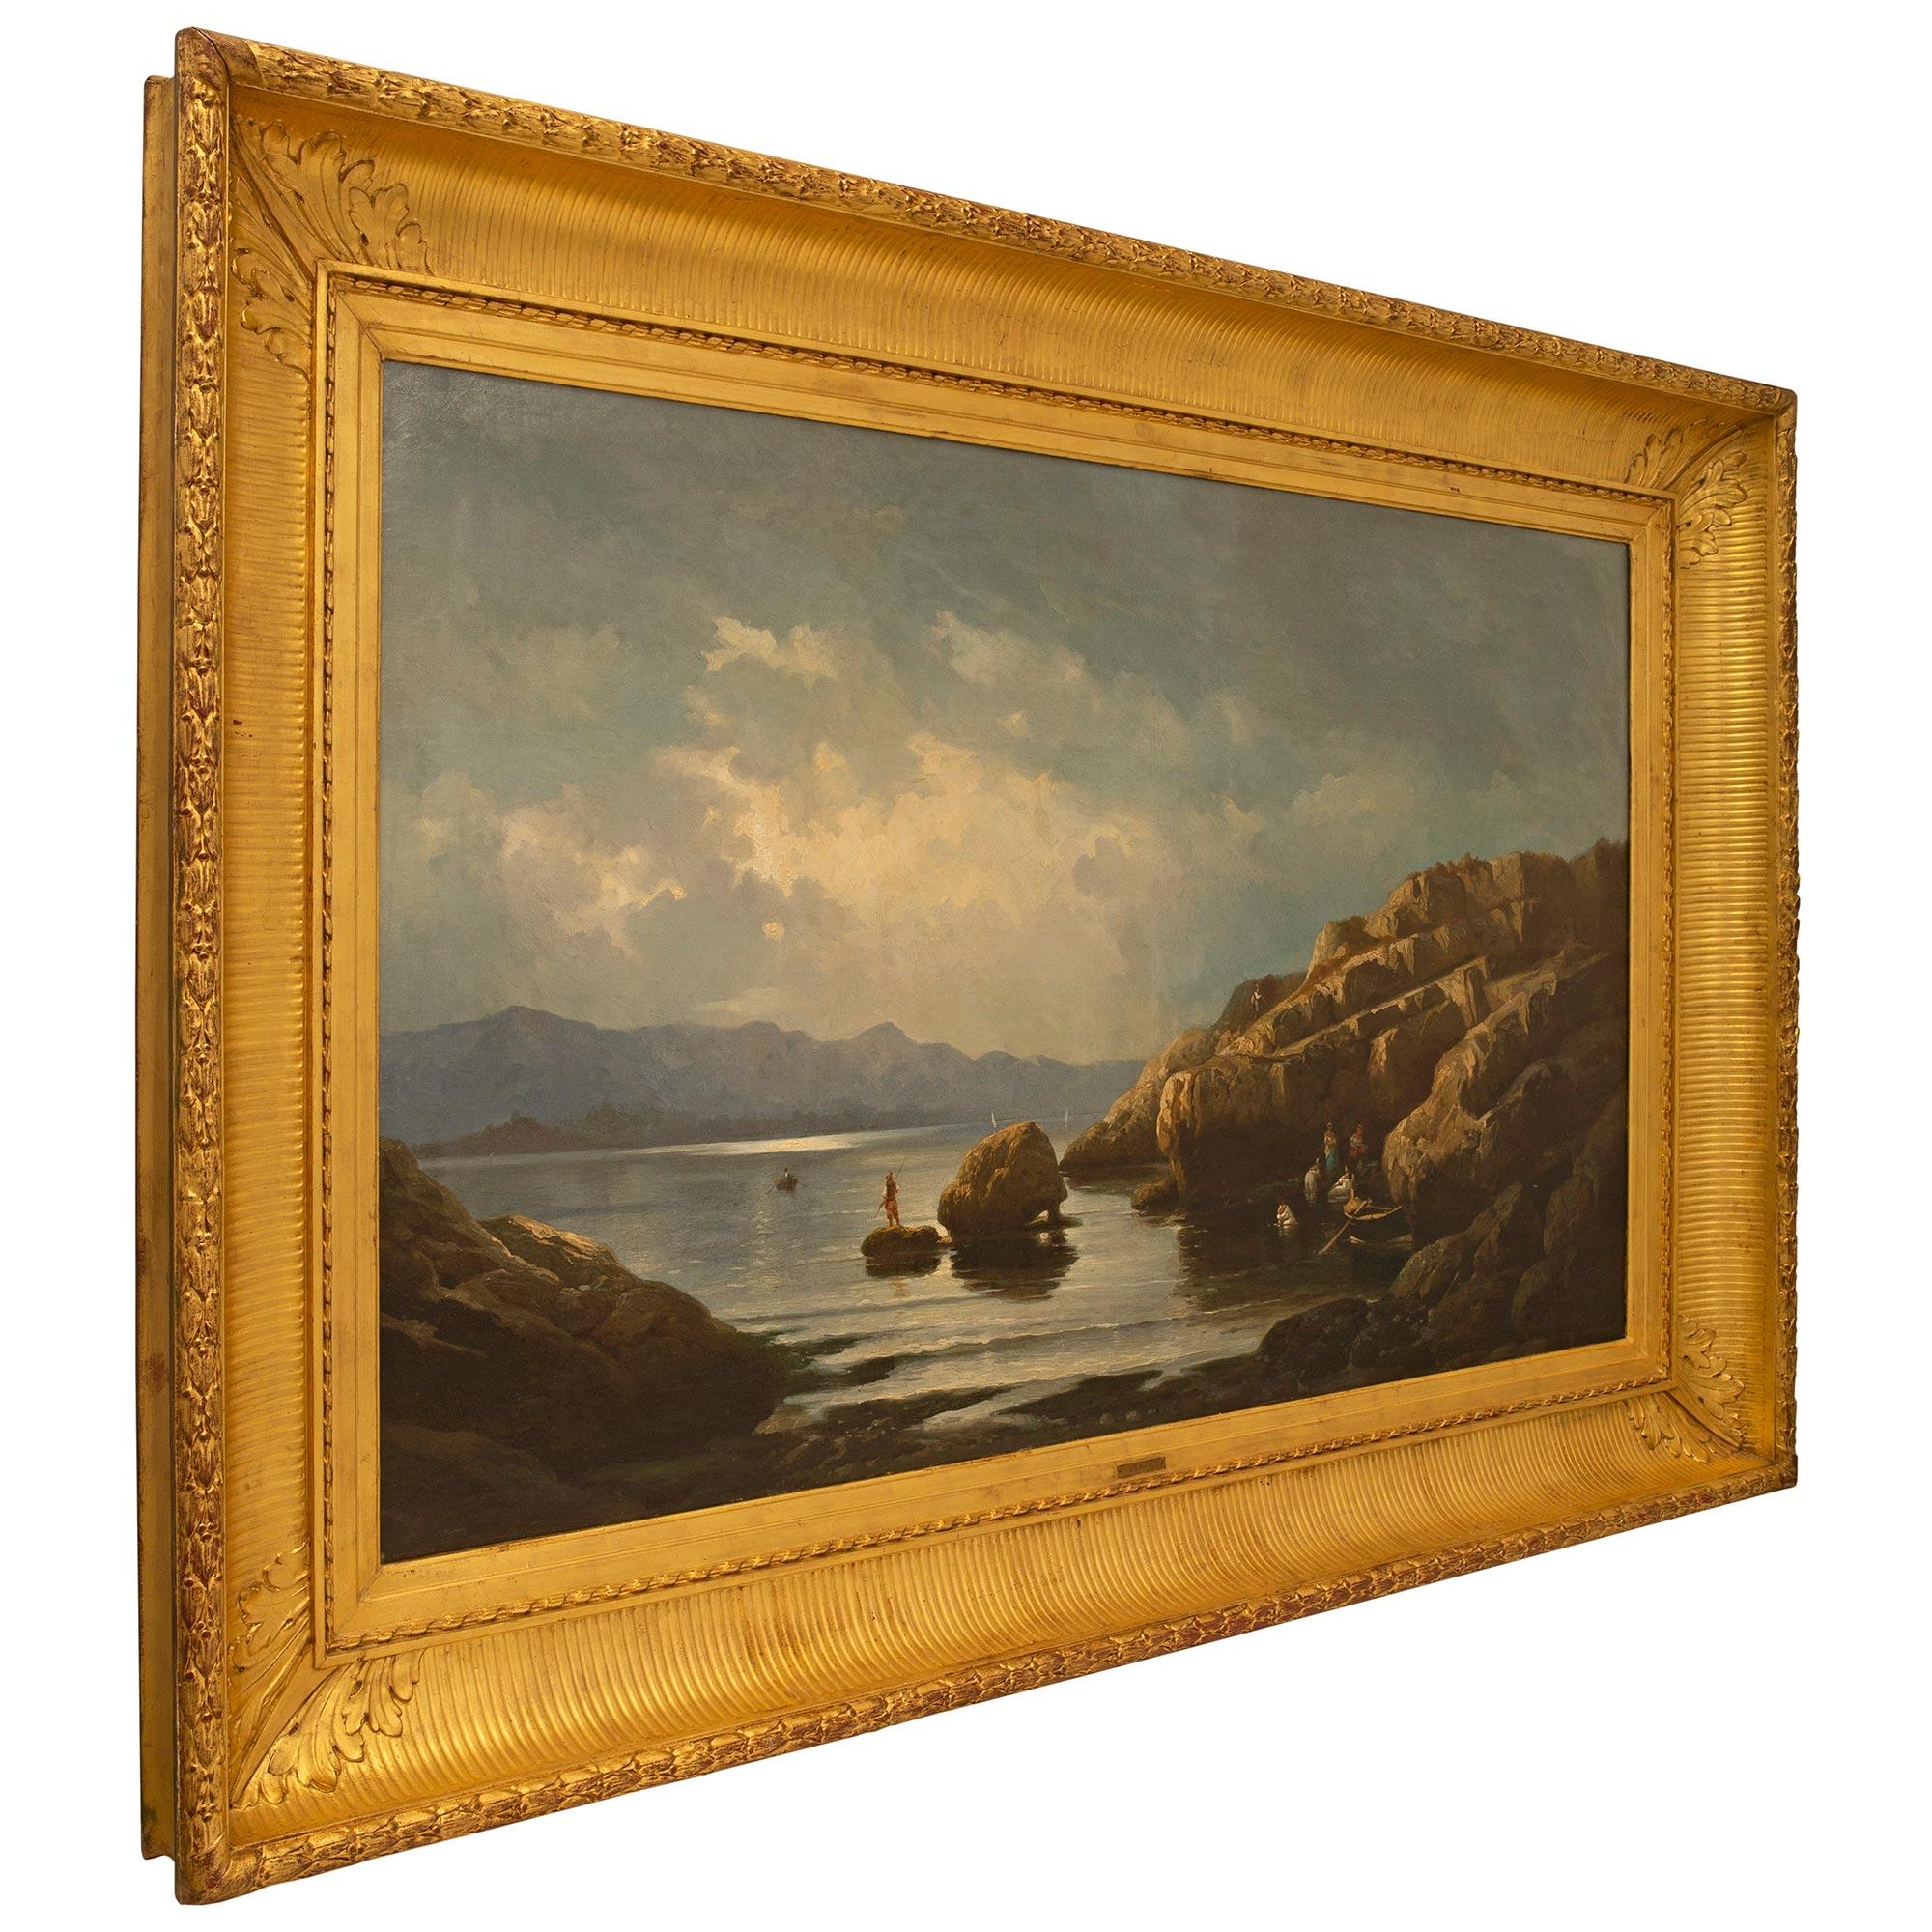 A sensational and large scale French mid-19th century oil on canvas painting by Marie-Auguste Martin circa 1860. The beautiful landscape painting is set within its original giltwood frame with a richly carved wrap around berried laurel band at the